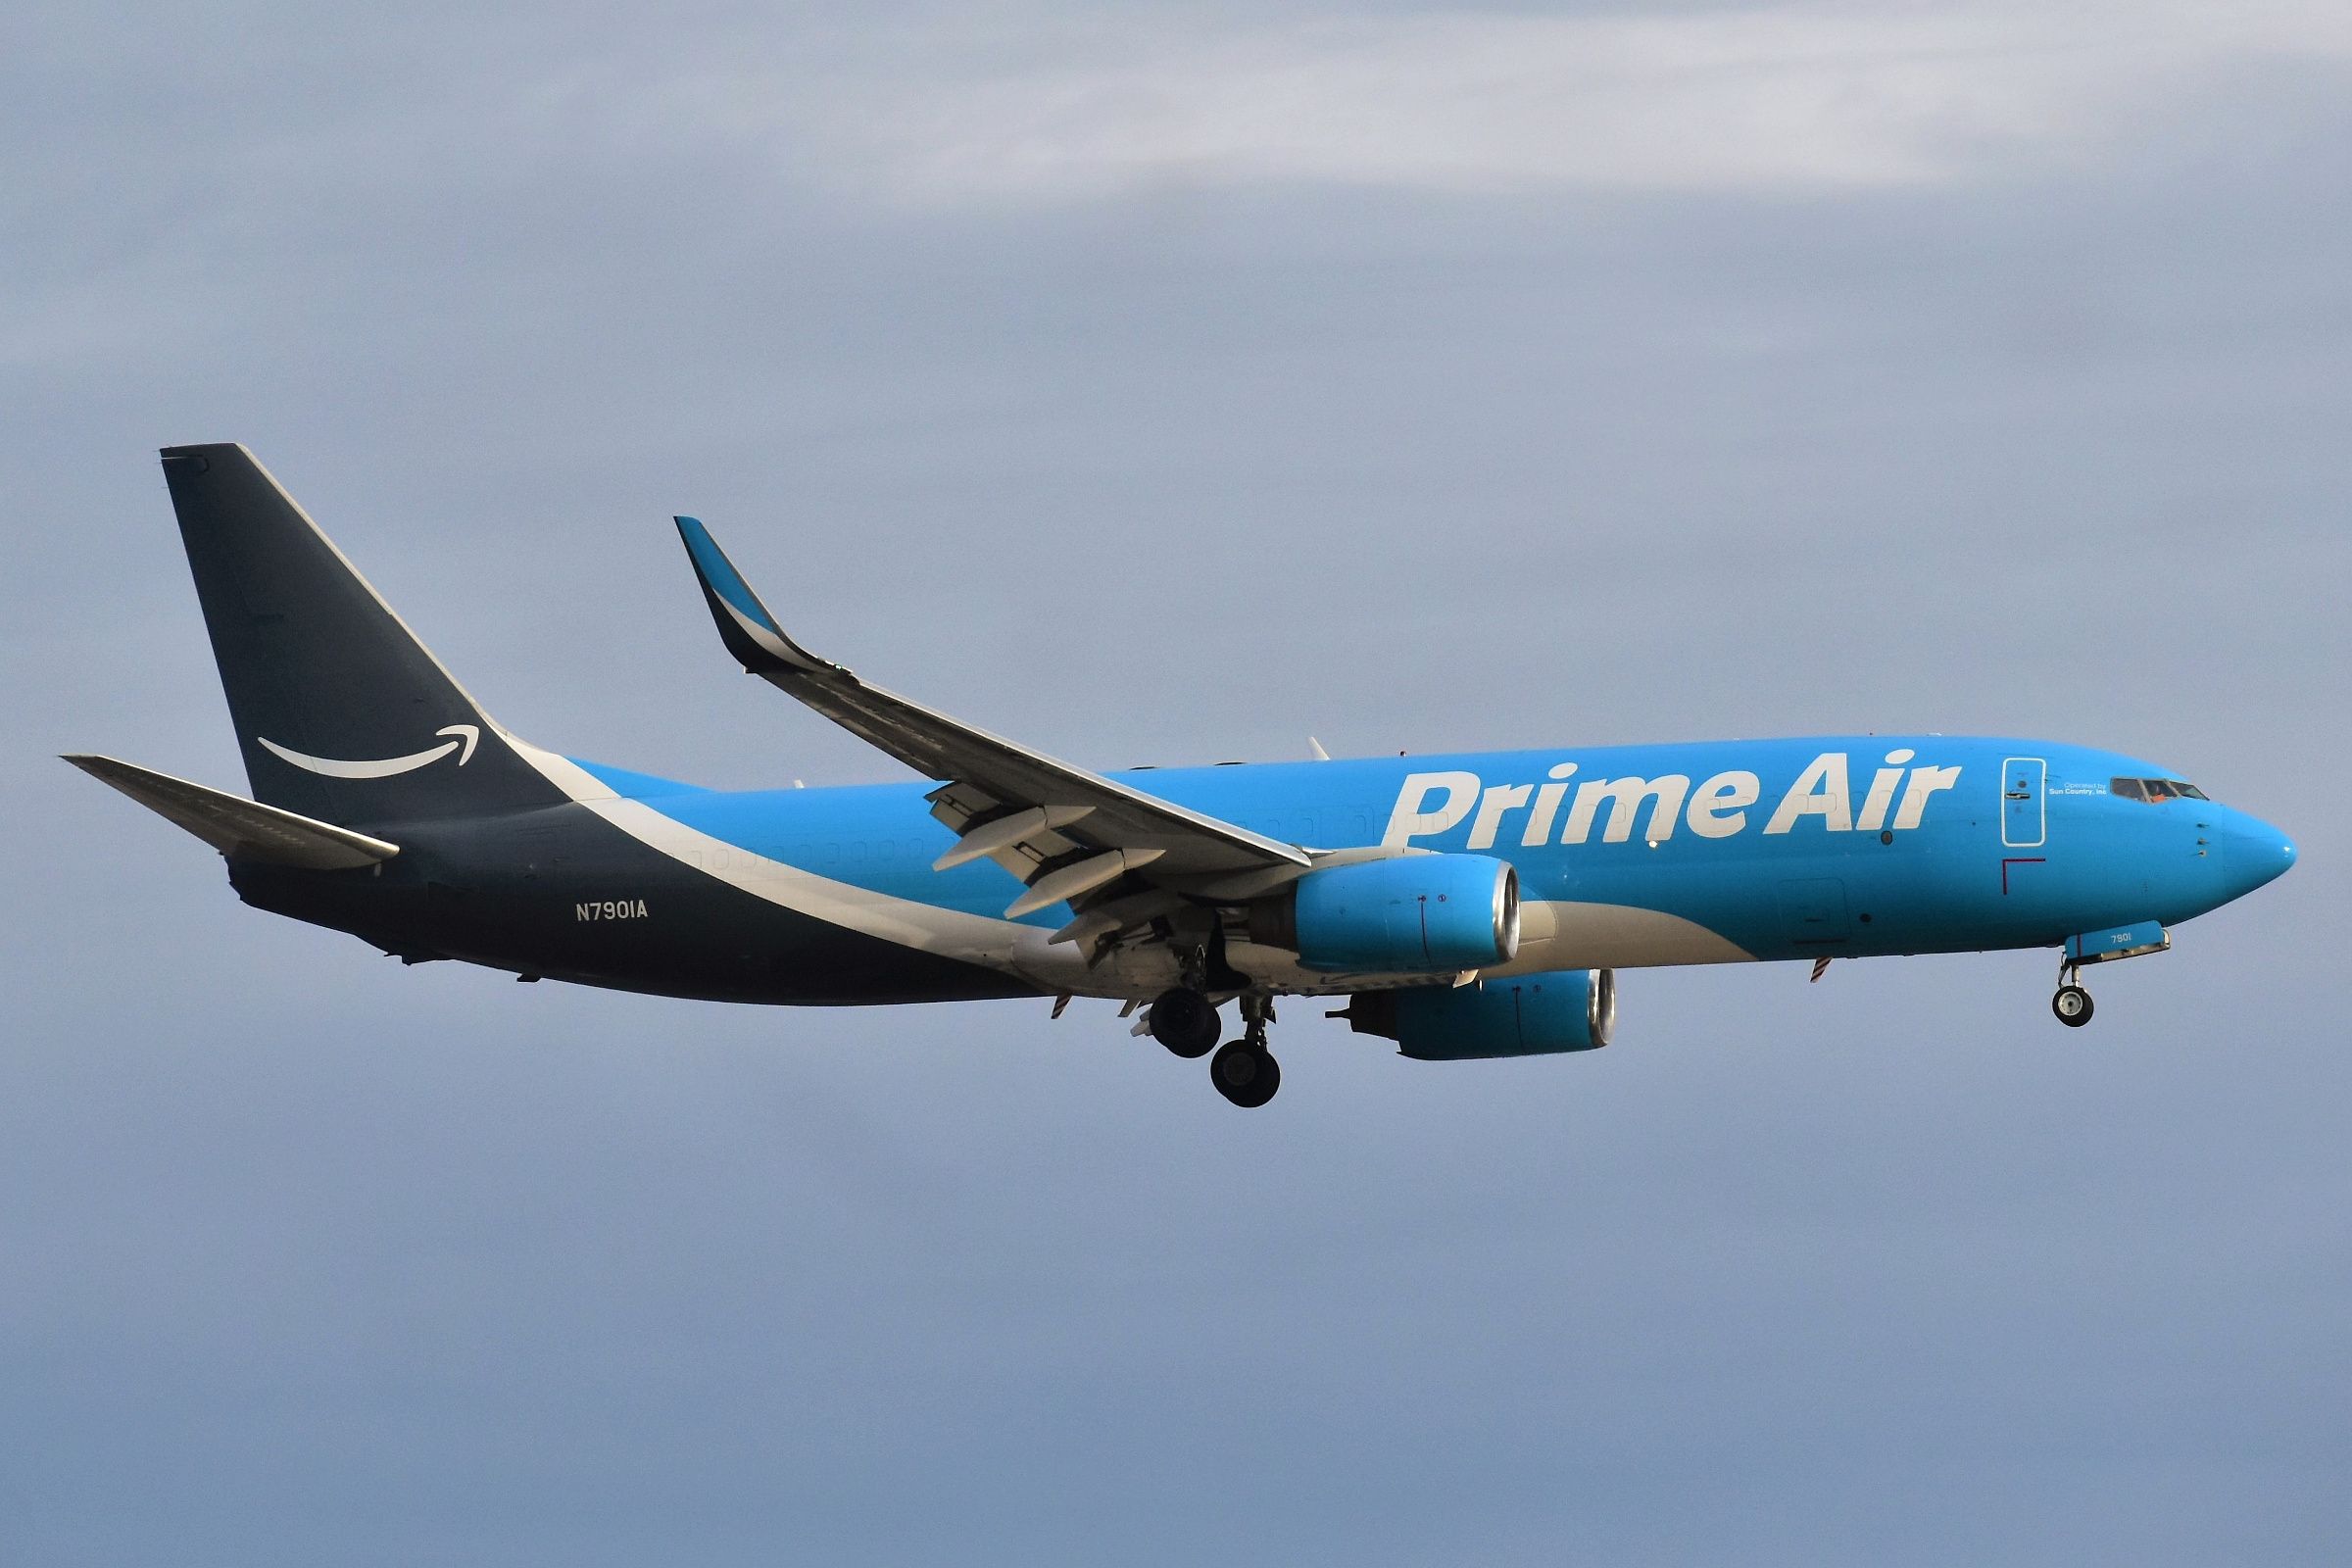 Amazon Prime Air Boeing 737 Freighter